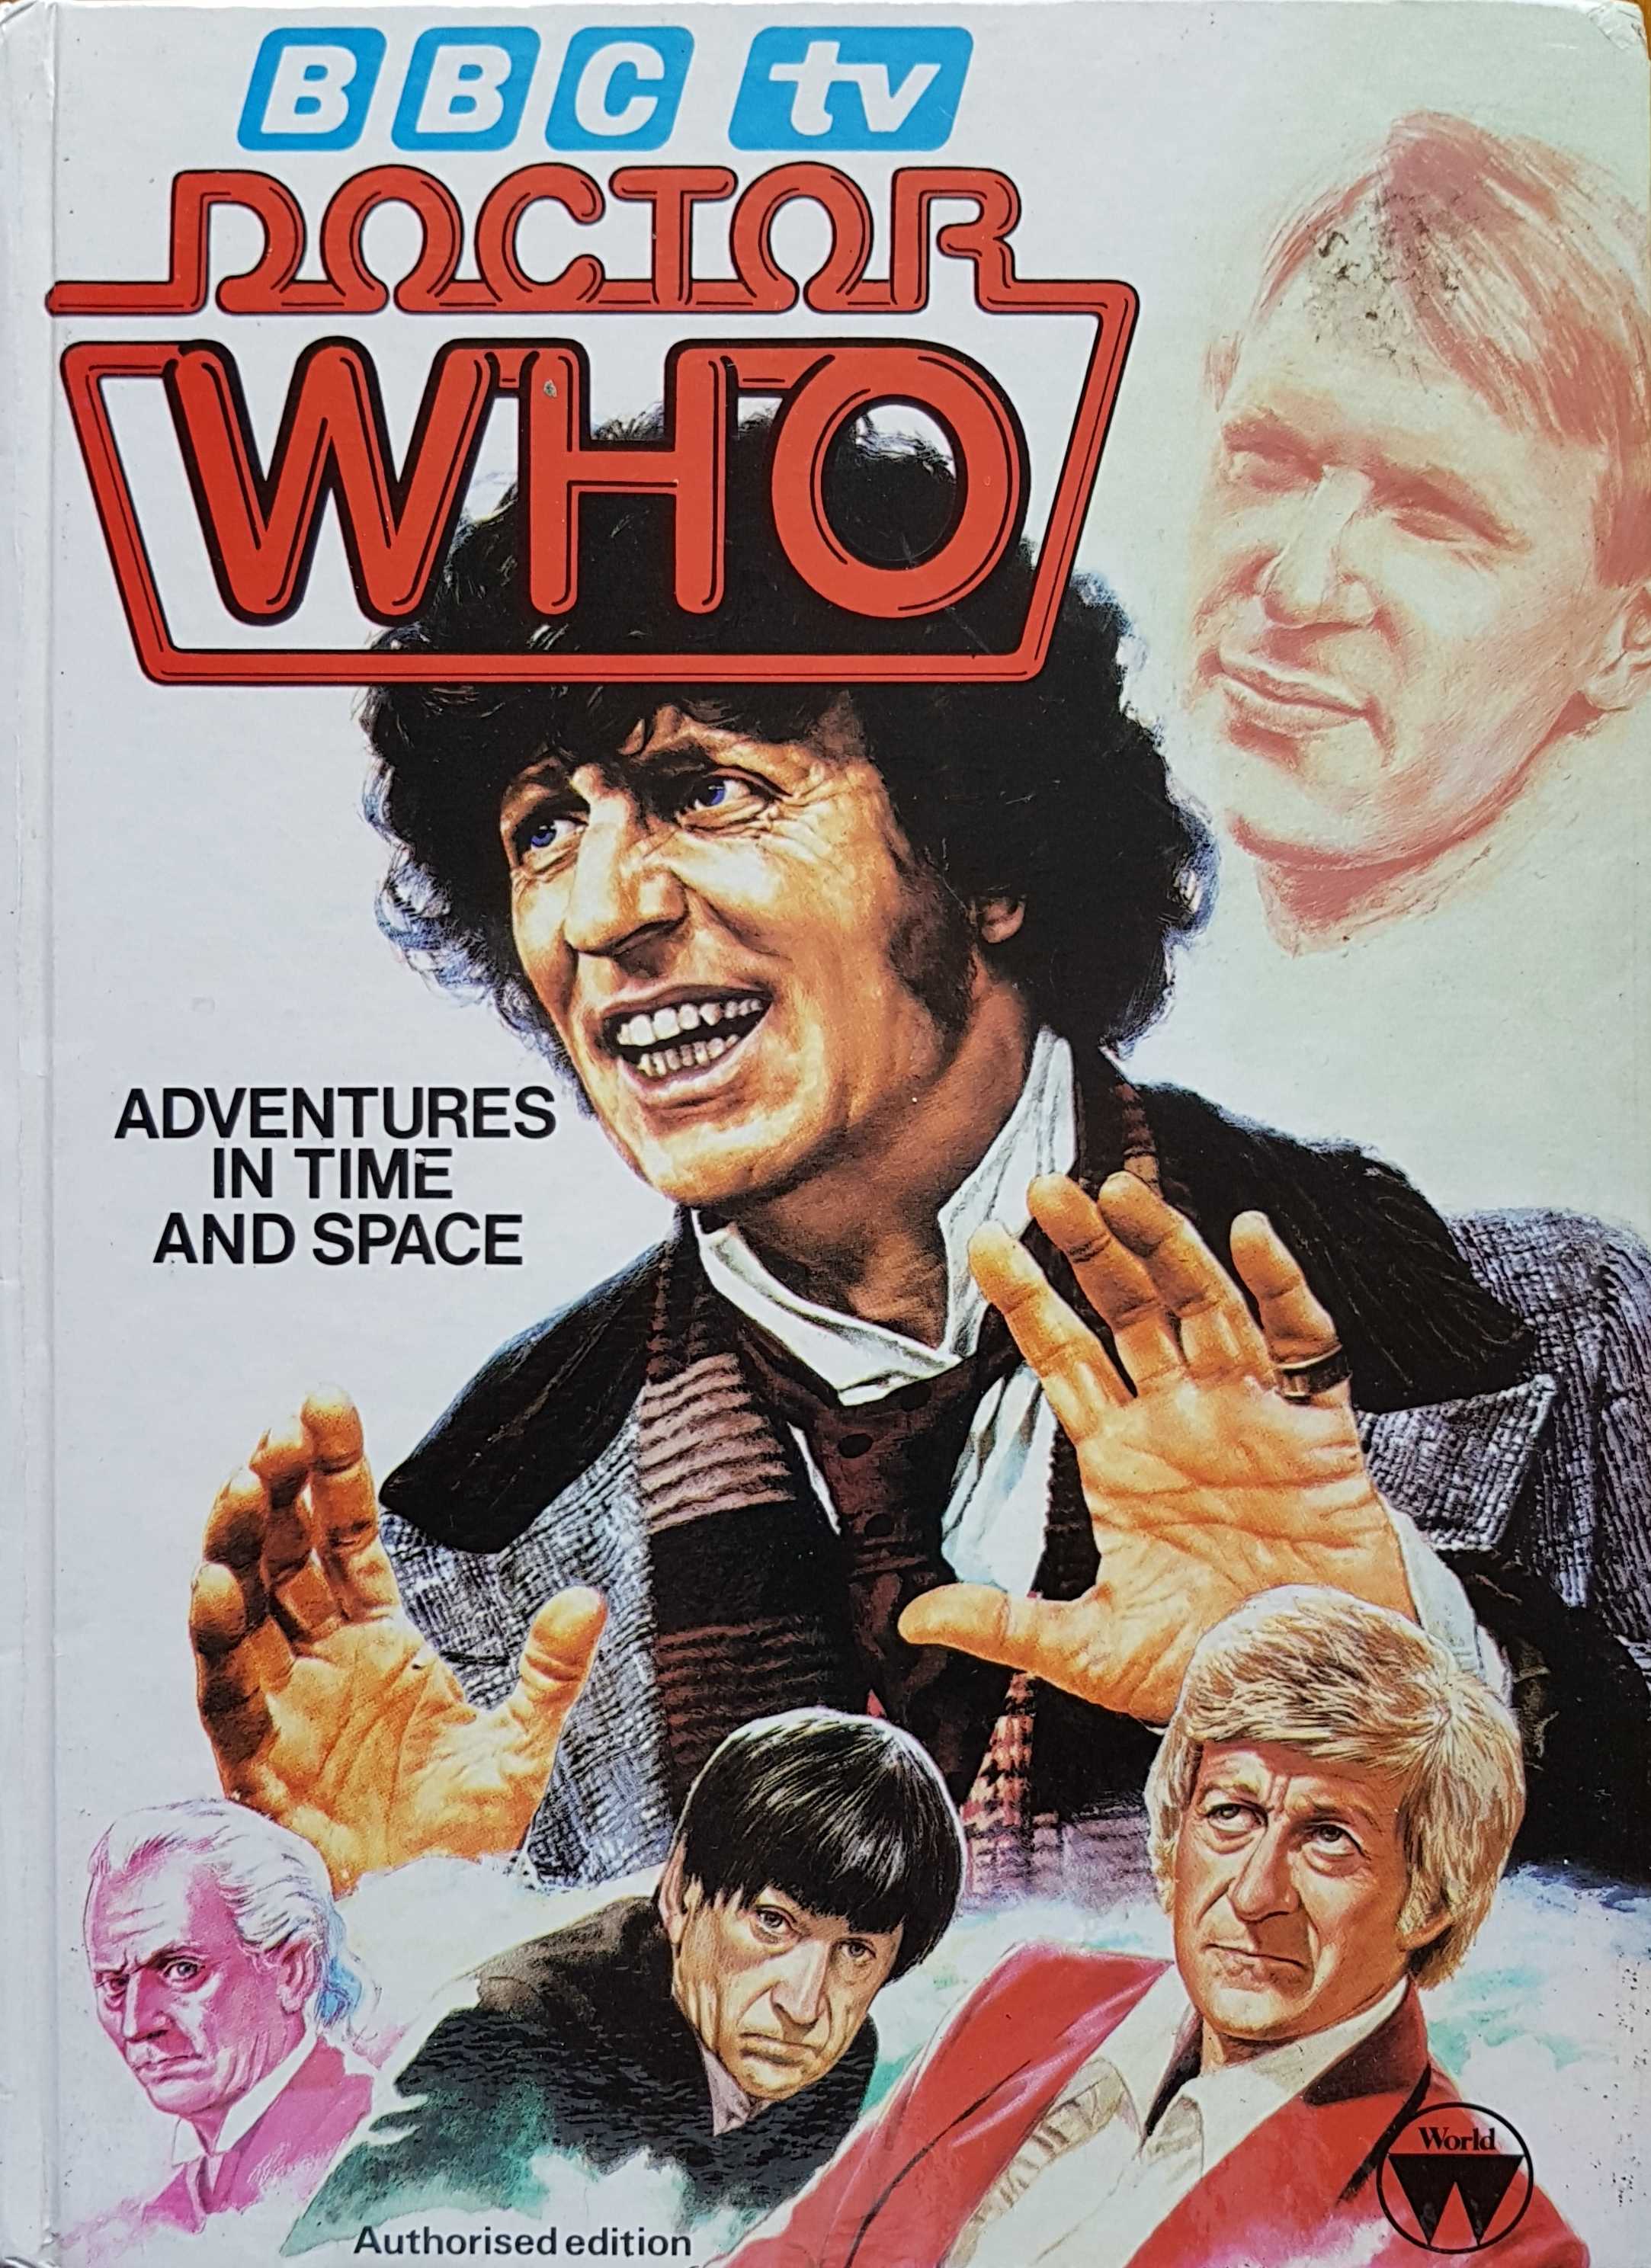 Picture of 0-7235-0968-9 Doctor Who - Adventures in time and space by artist Various from the BBC books - Records and Tapes library